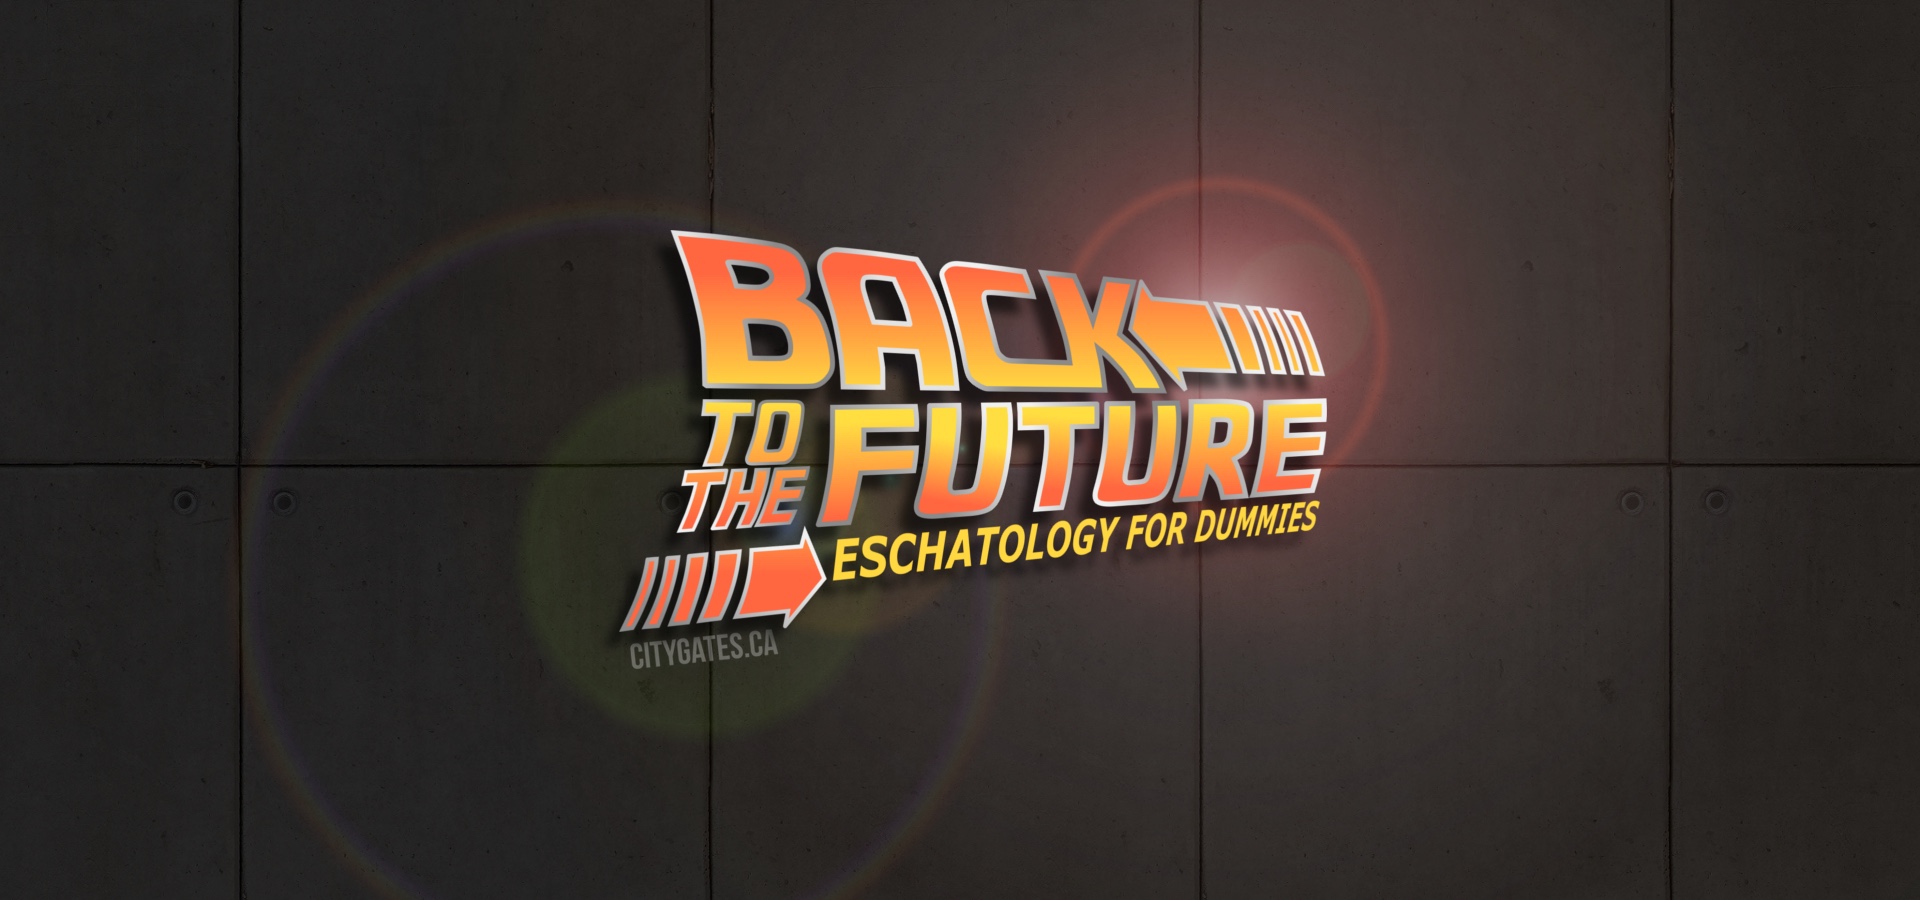 Back To The Future pt2 – Return of Christ